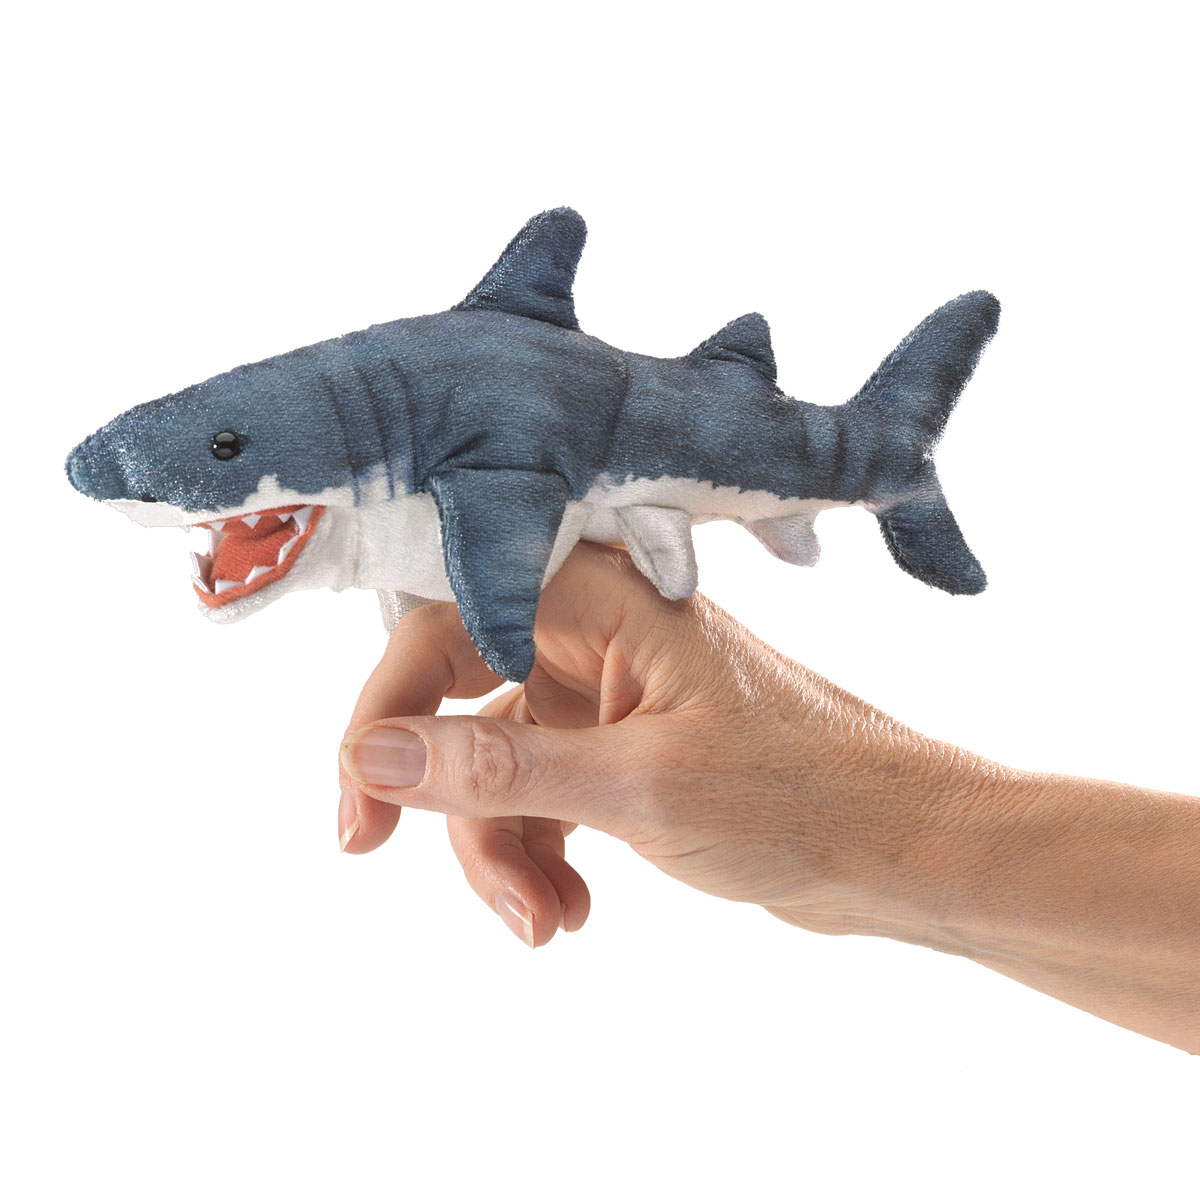 This aggressively-cute oven mitt.  Shark accessories, Shark, Puppets